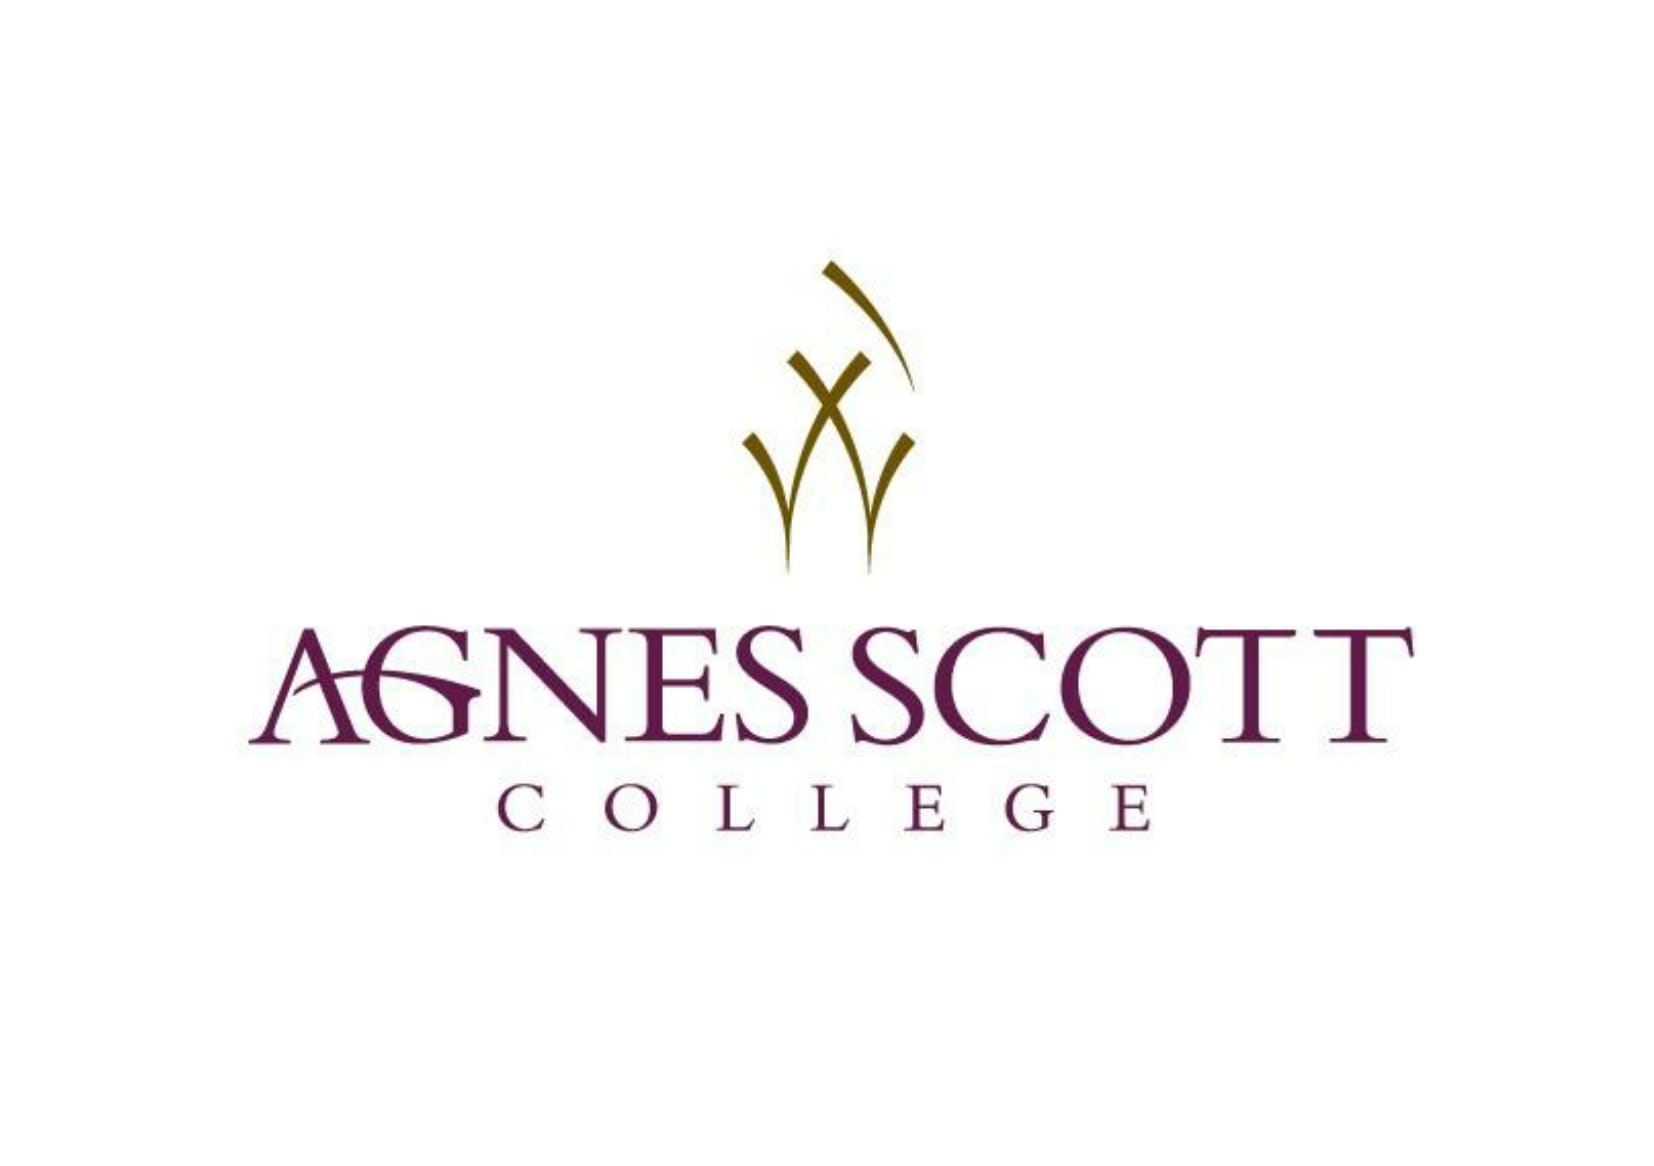 Agnes Scott College is an independent undergraduate college in the United States. Agnes Scott's campus lies in downtown Decatur, Georgia, nestled inside the perimeter of the bustling metro-Atlanta area. The college was founded in 1889 as Decatur Female Seminary by a group of Presbyterians under the leadership of their minister, Frank H. Gaines. The college offers 34 undergraduate majors and 31 minors and is affiliated with numerous institutions, including Georgia Institute of Technology and Emory University School of Nursing. www.agnesscott.edu